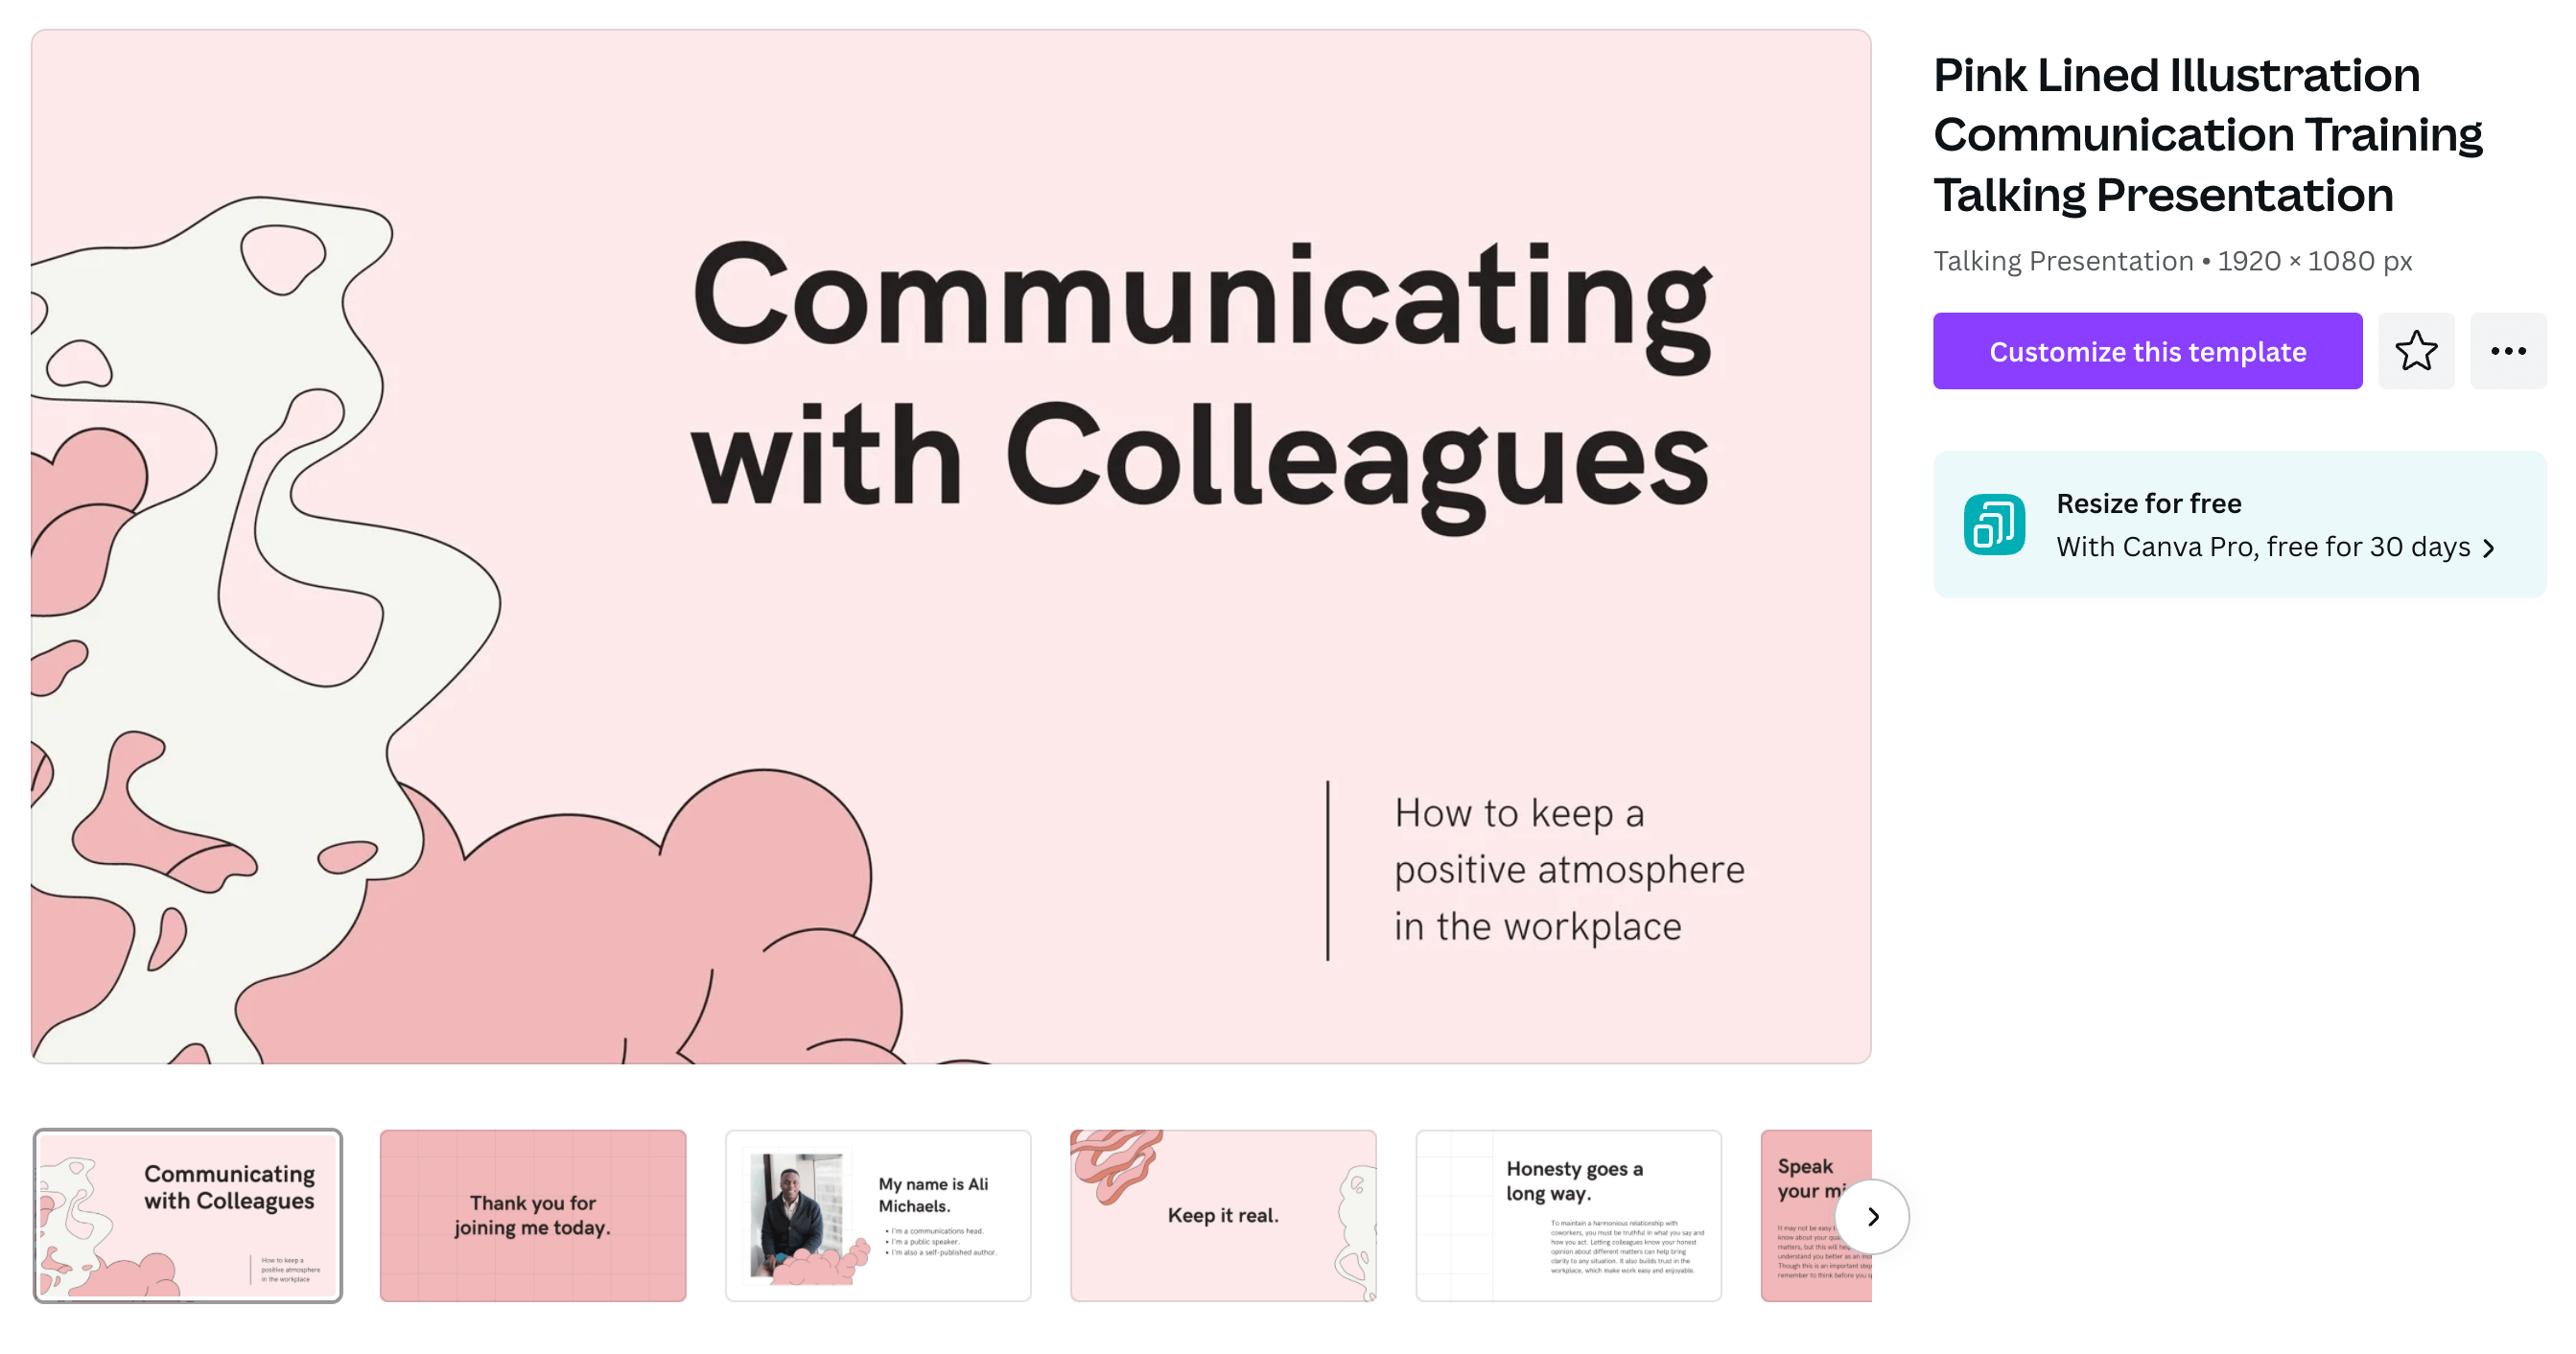 A pink and white slideshow template. The first slide says "Communicating with Colleagues"